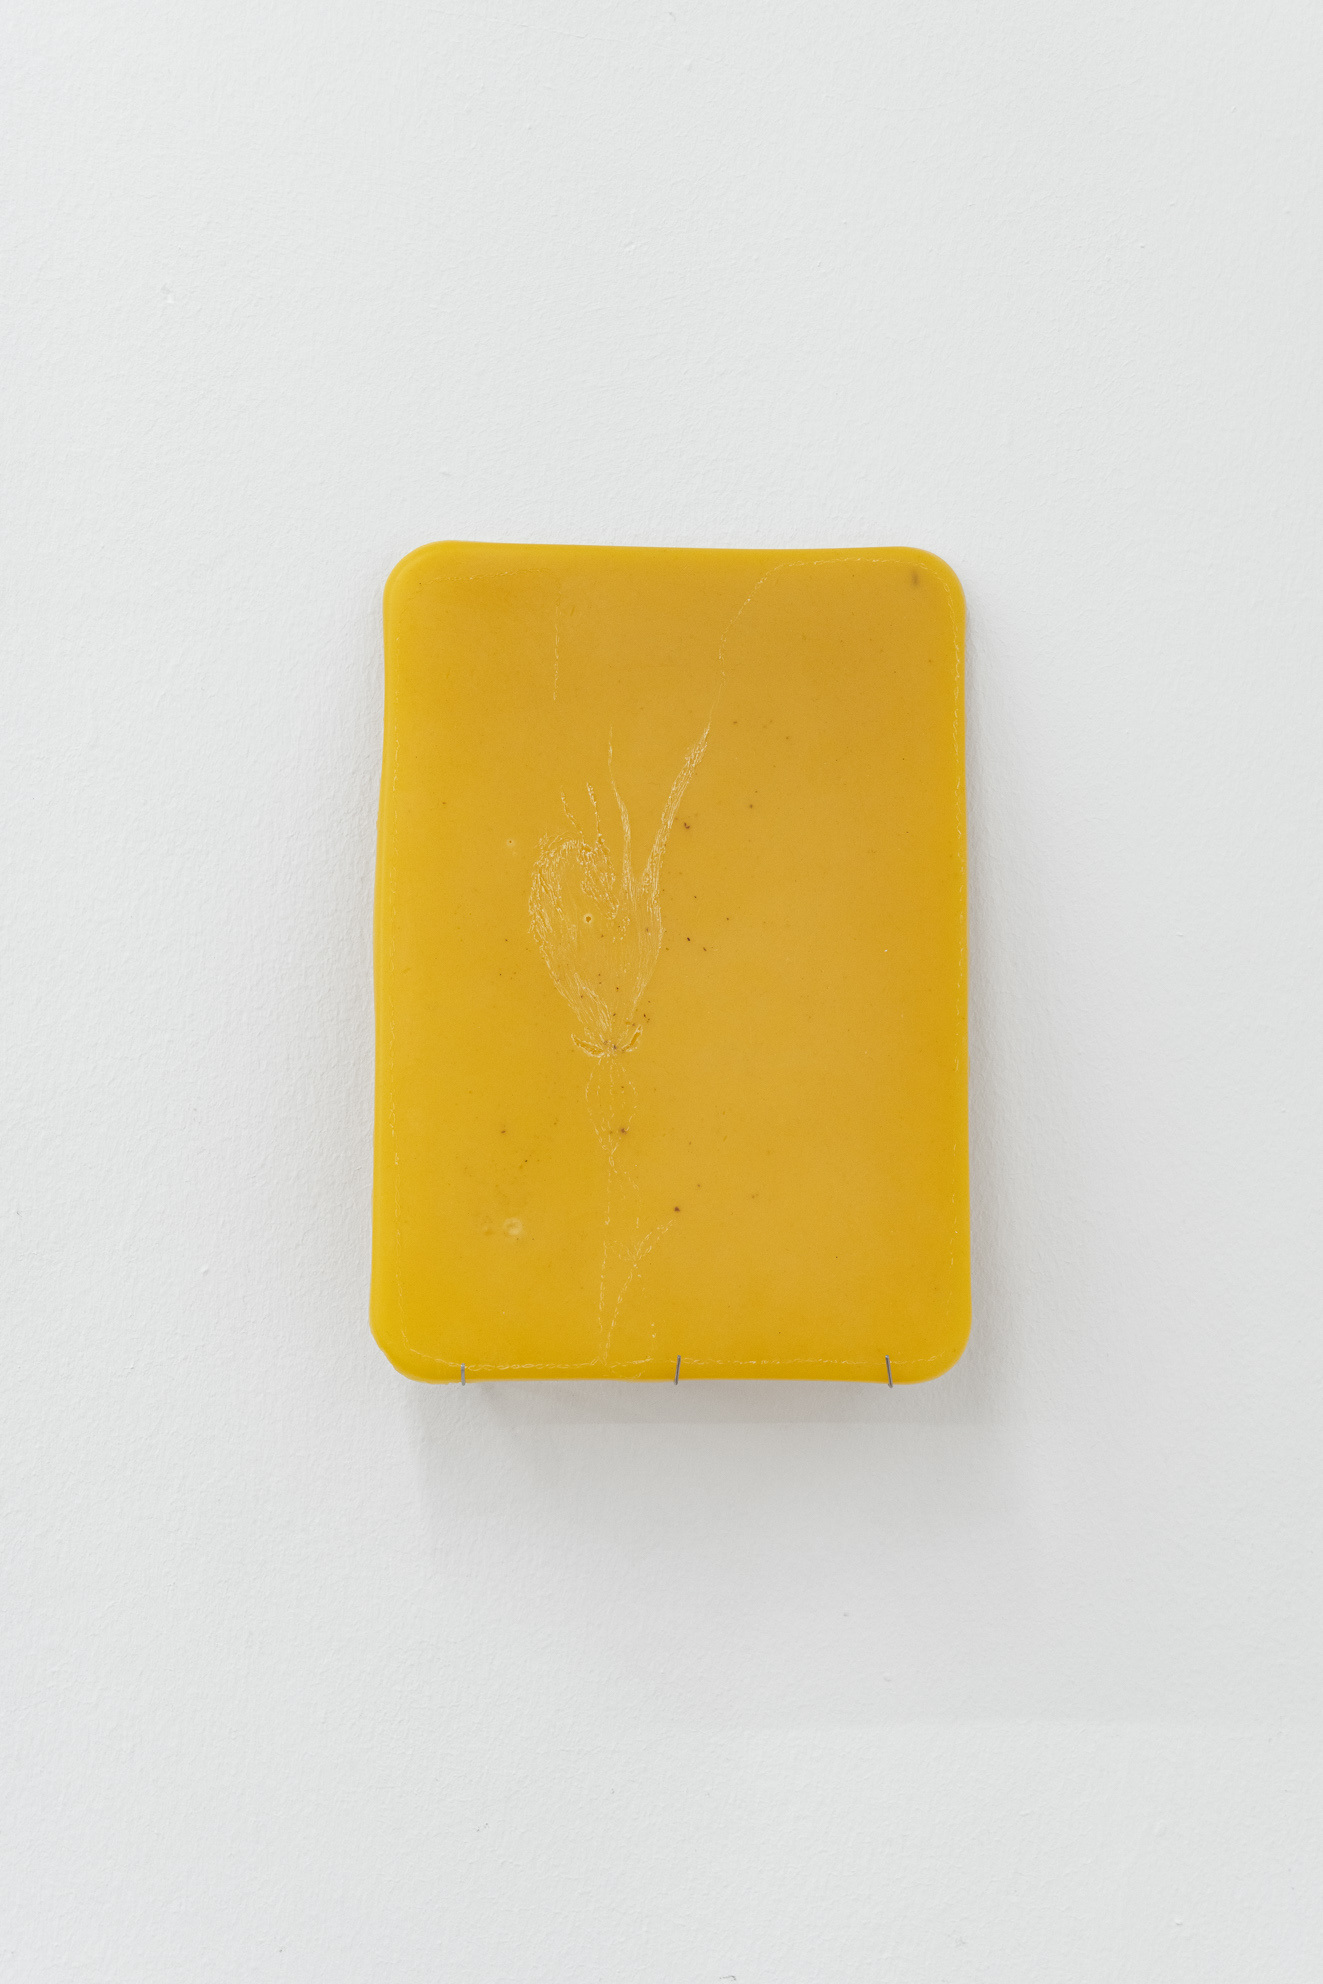 Laura Ní Fhlaibhín, "Pearls are dripping from their furry hole", 2023, engraved beeswax tablet, cast from surgical tray, 20 x 30 cm